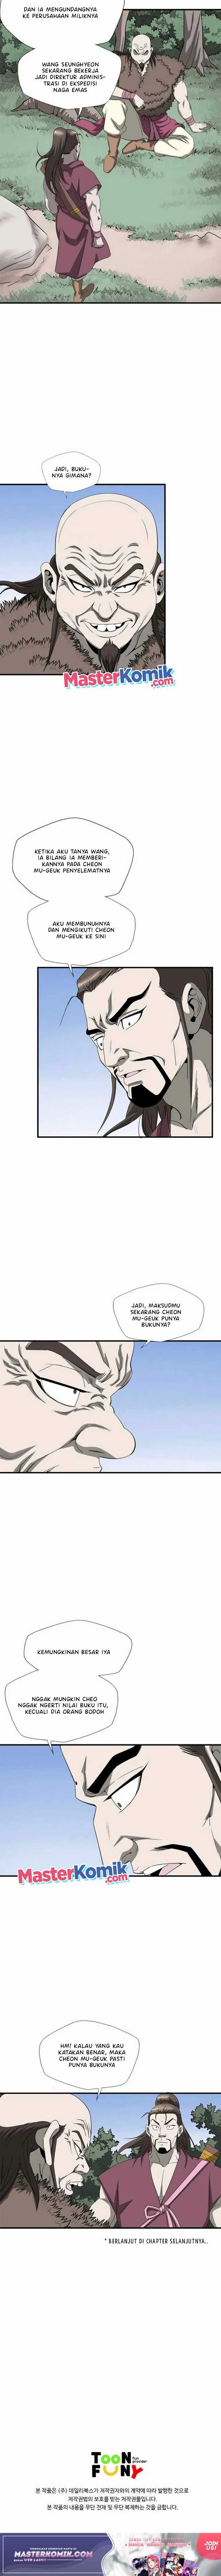 Strong Gale, Mad Dragon Chapter 45